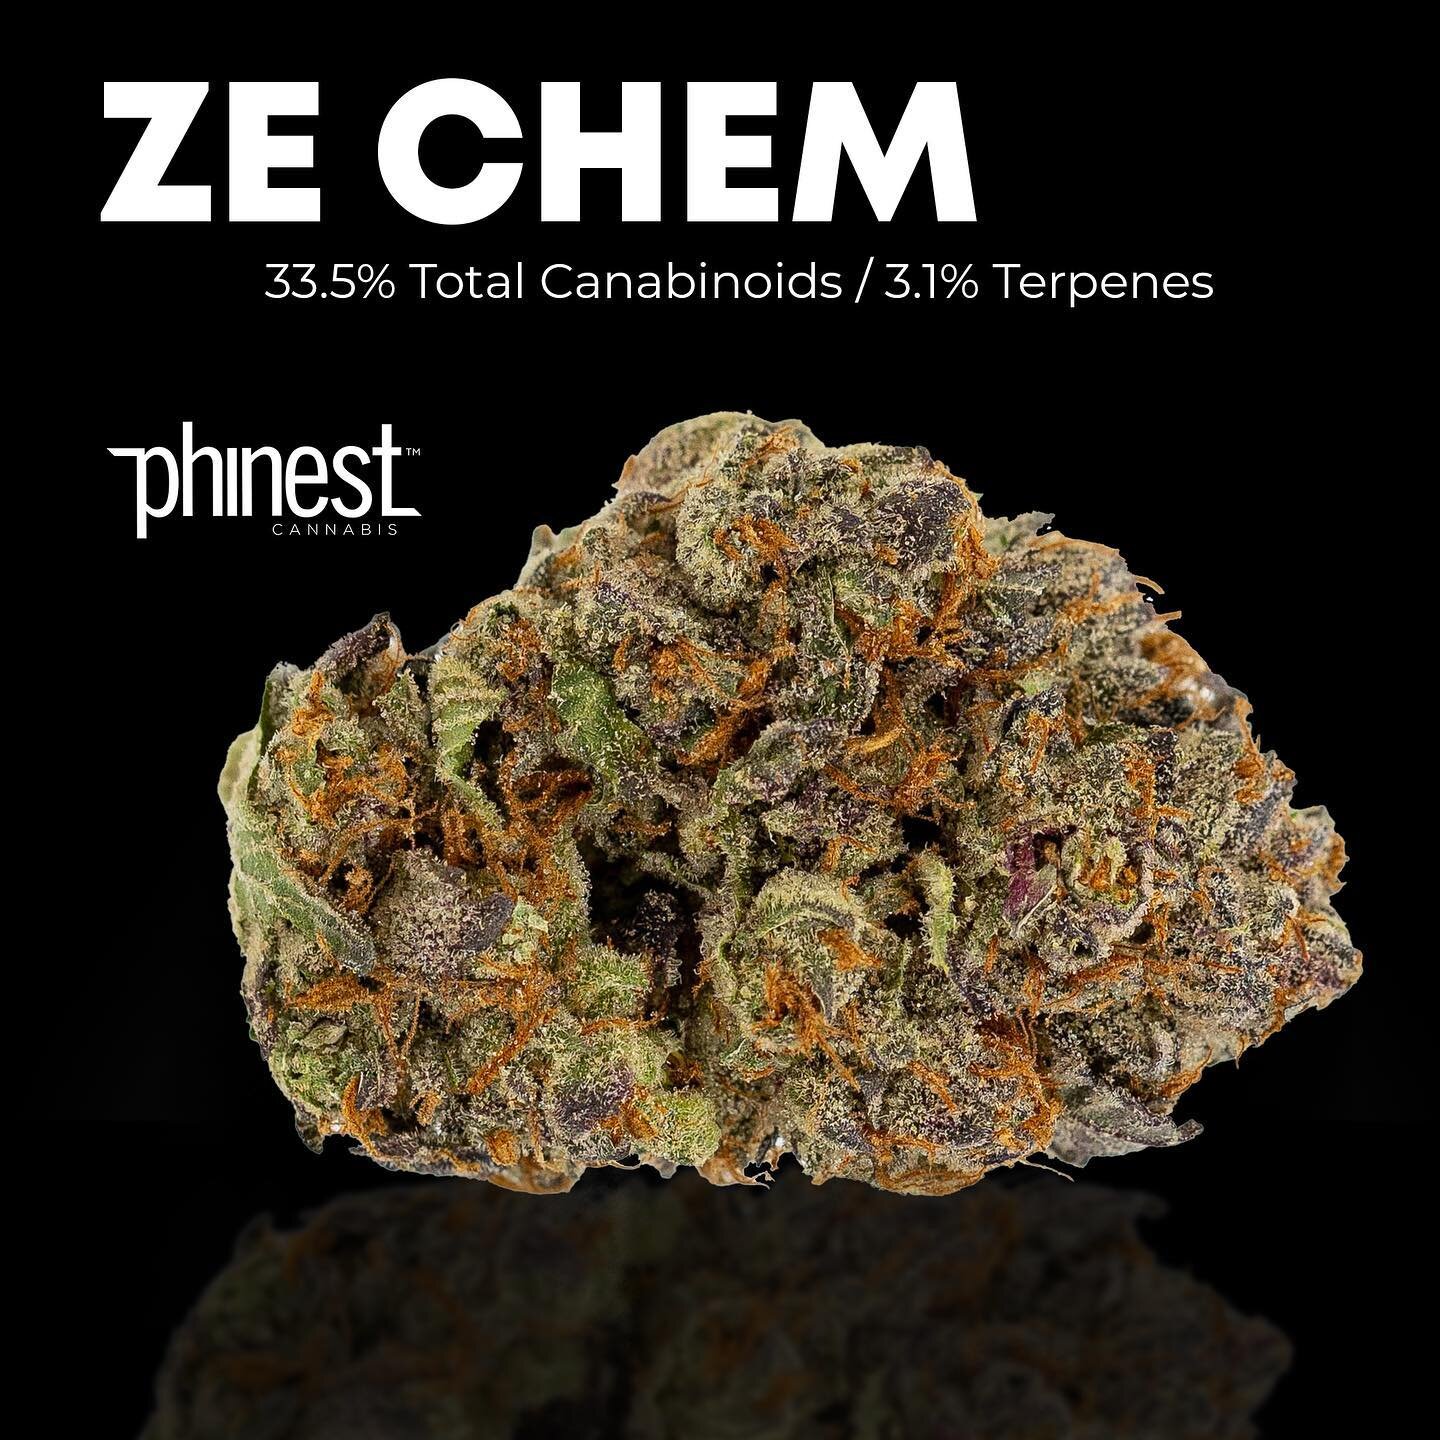 Ze Chem is an indica-dominant cultivar made from crossing Daily Driver (Sundae Driver x Zkittlez) x Chem D featuring &beta;-caryophyllene, limonene, and &beta;-myrcene as well as hints of ocimene &amp; humulene delivering a complex nose &amp; experie